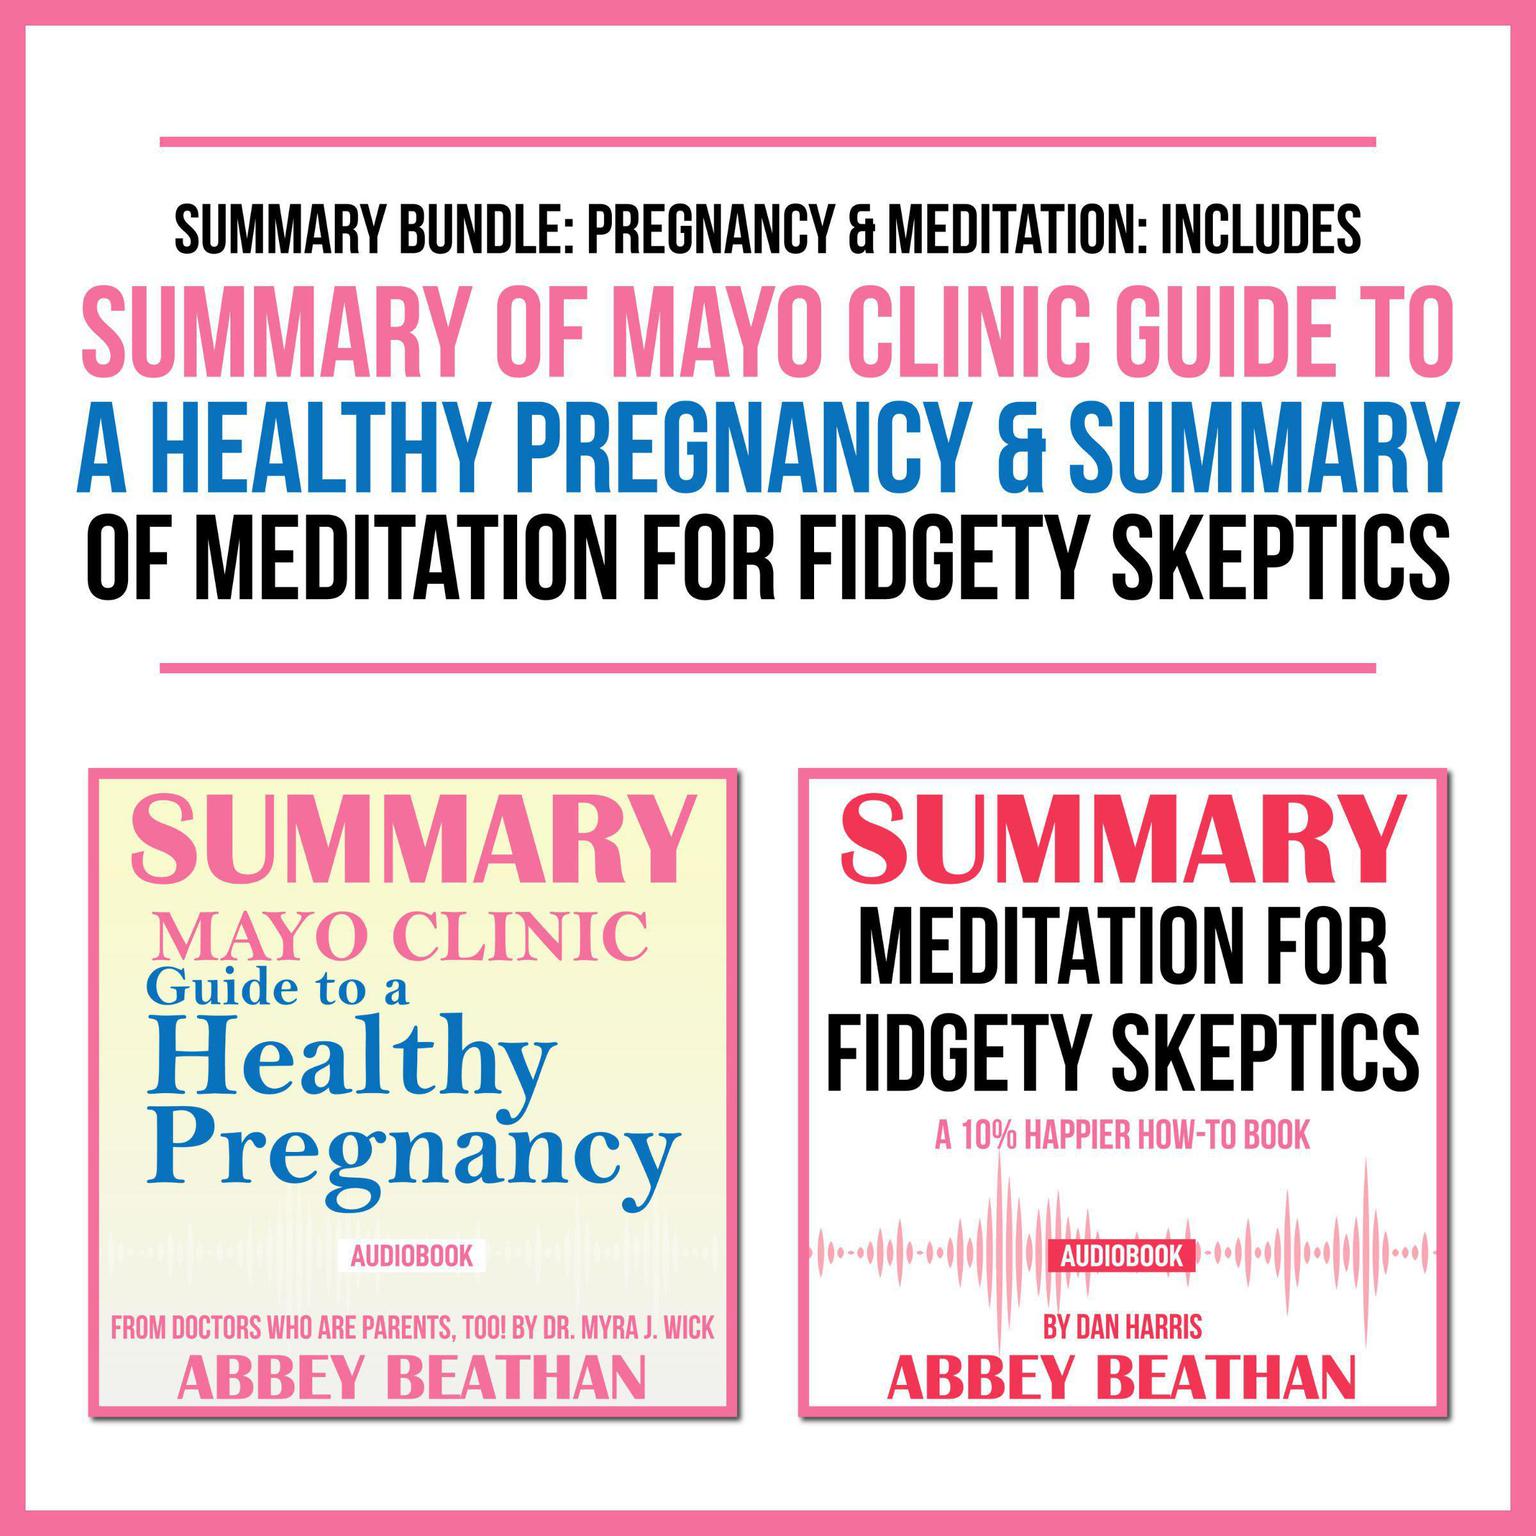 Summary Bundle: Pregnancy & Meditation: Includes Summary of Mayo Clinic Guide to a Healthy Pregnancy & Summary of Meditation for Fidgety Skeptics Audiobook, by Abbey Beathan